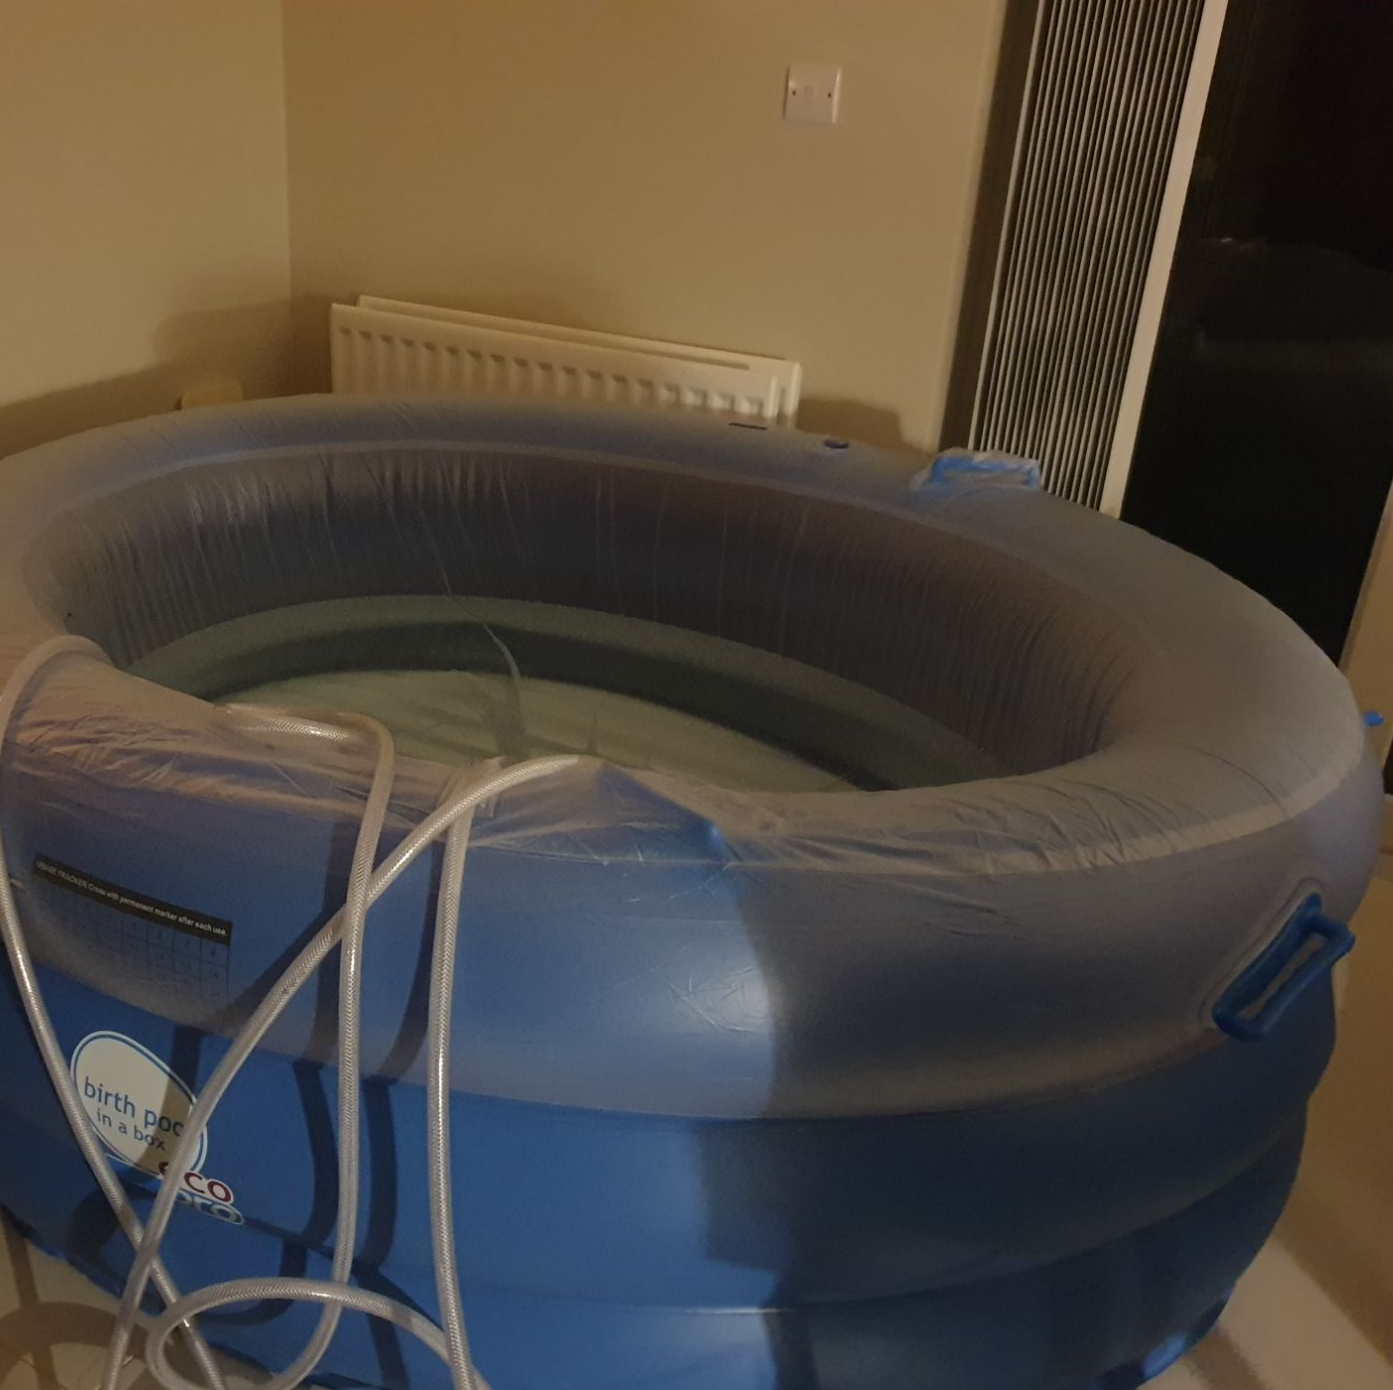 A regular pool in a client's kitchen. It is filled with water and the hose is draped over the side.